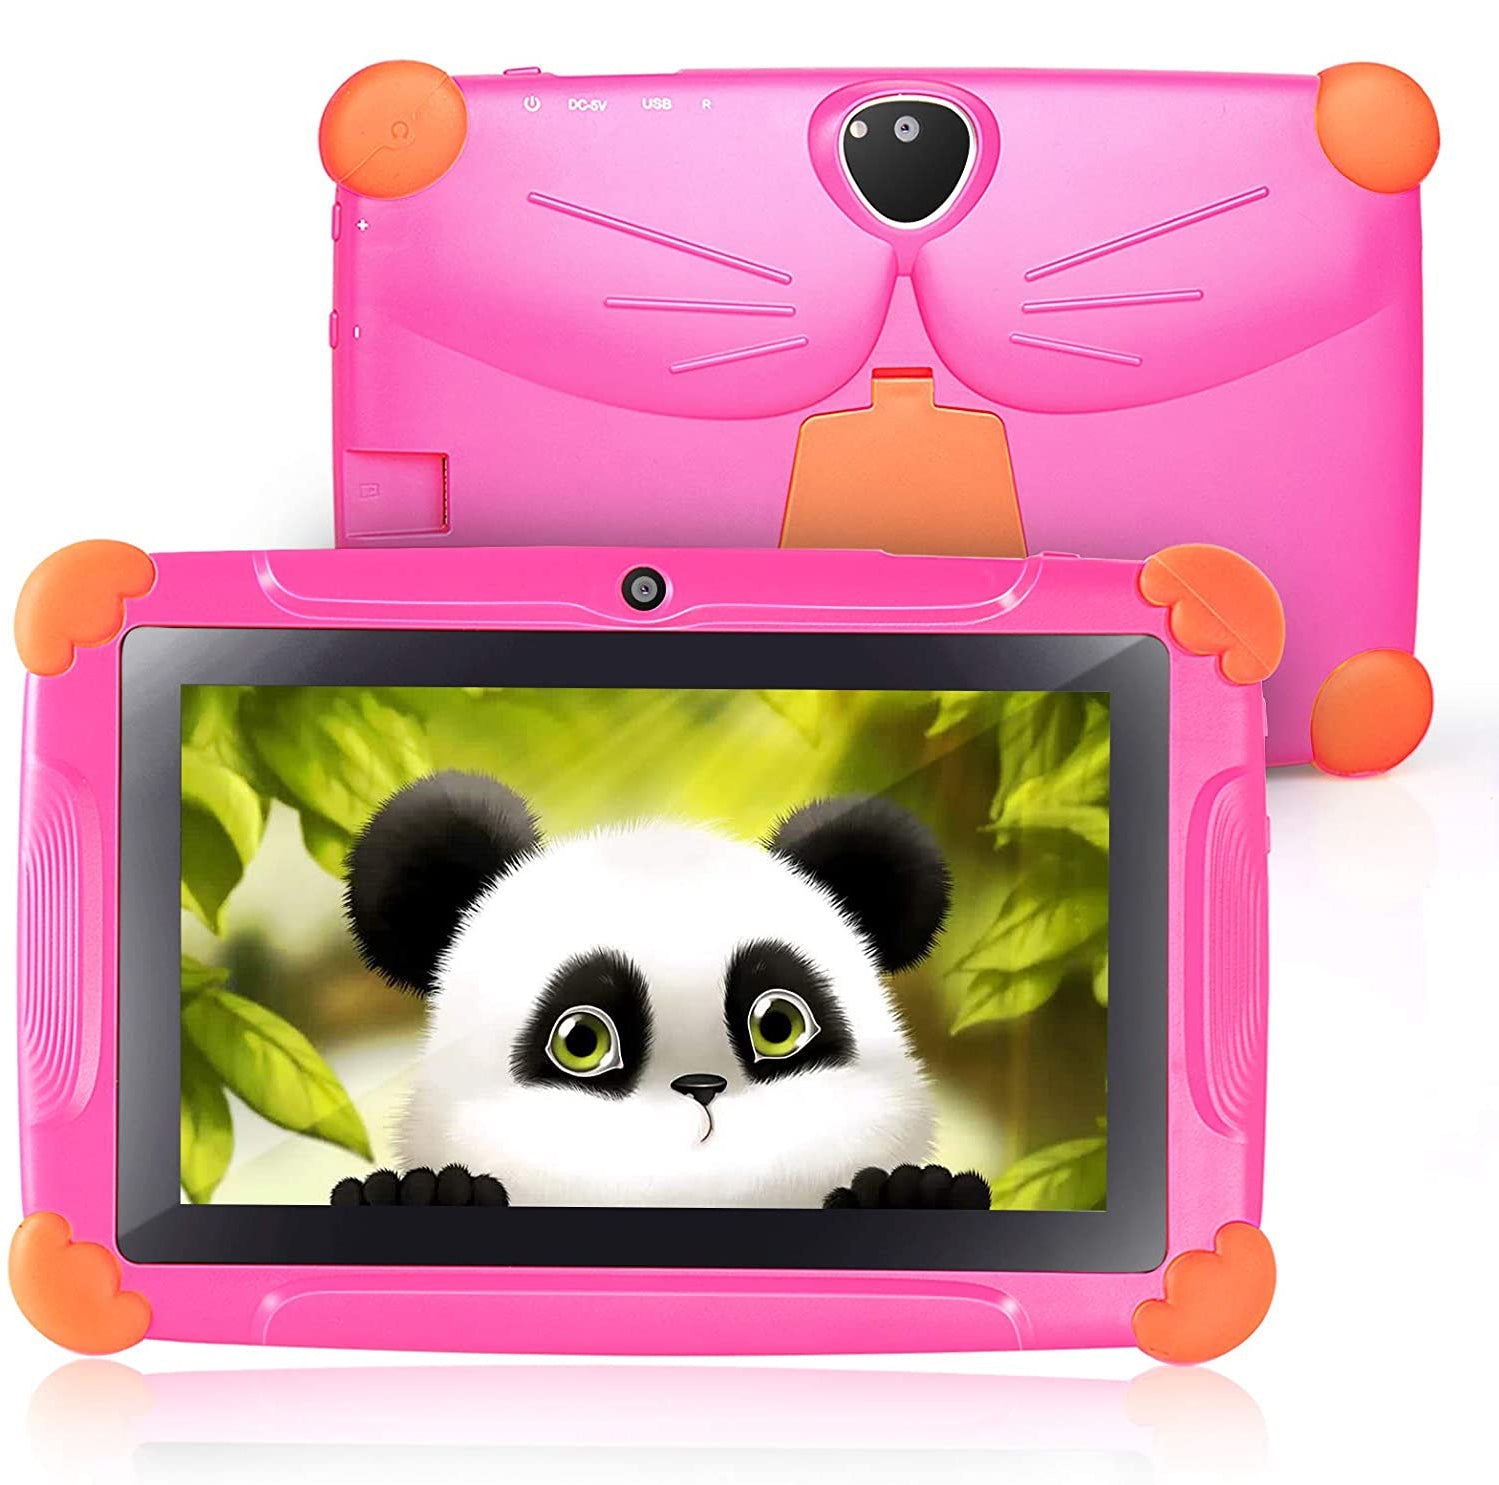 Wintouch OEM Child Learning Tablets For Kids Children Tab Android Baby Toy Tablet Pc Educational Wifi 7 Inch Kids Tablet | Electrr Inc